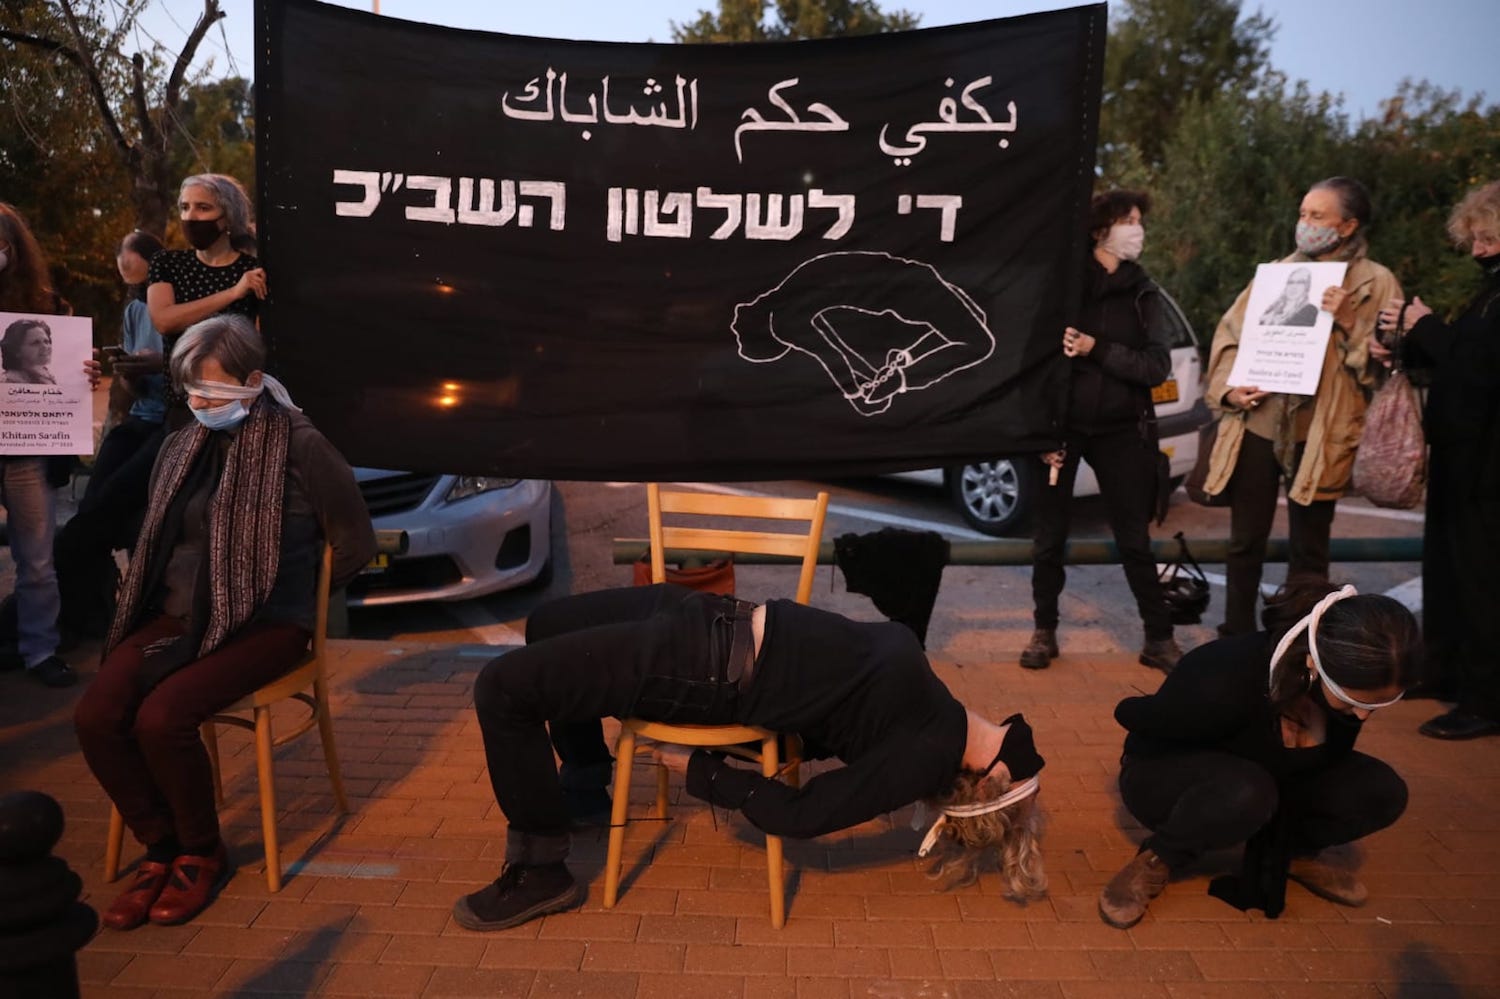 Israeli activists hold a display of Shin Bet torture techniques during a demonstration against administrative detention outside the agency's offices, Tel Aviv, December 10, 2020. (Oren Ziv)